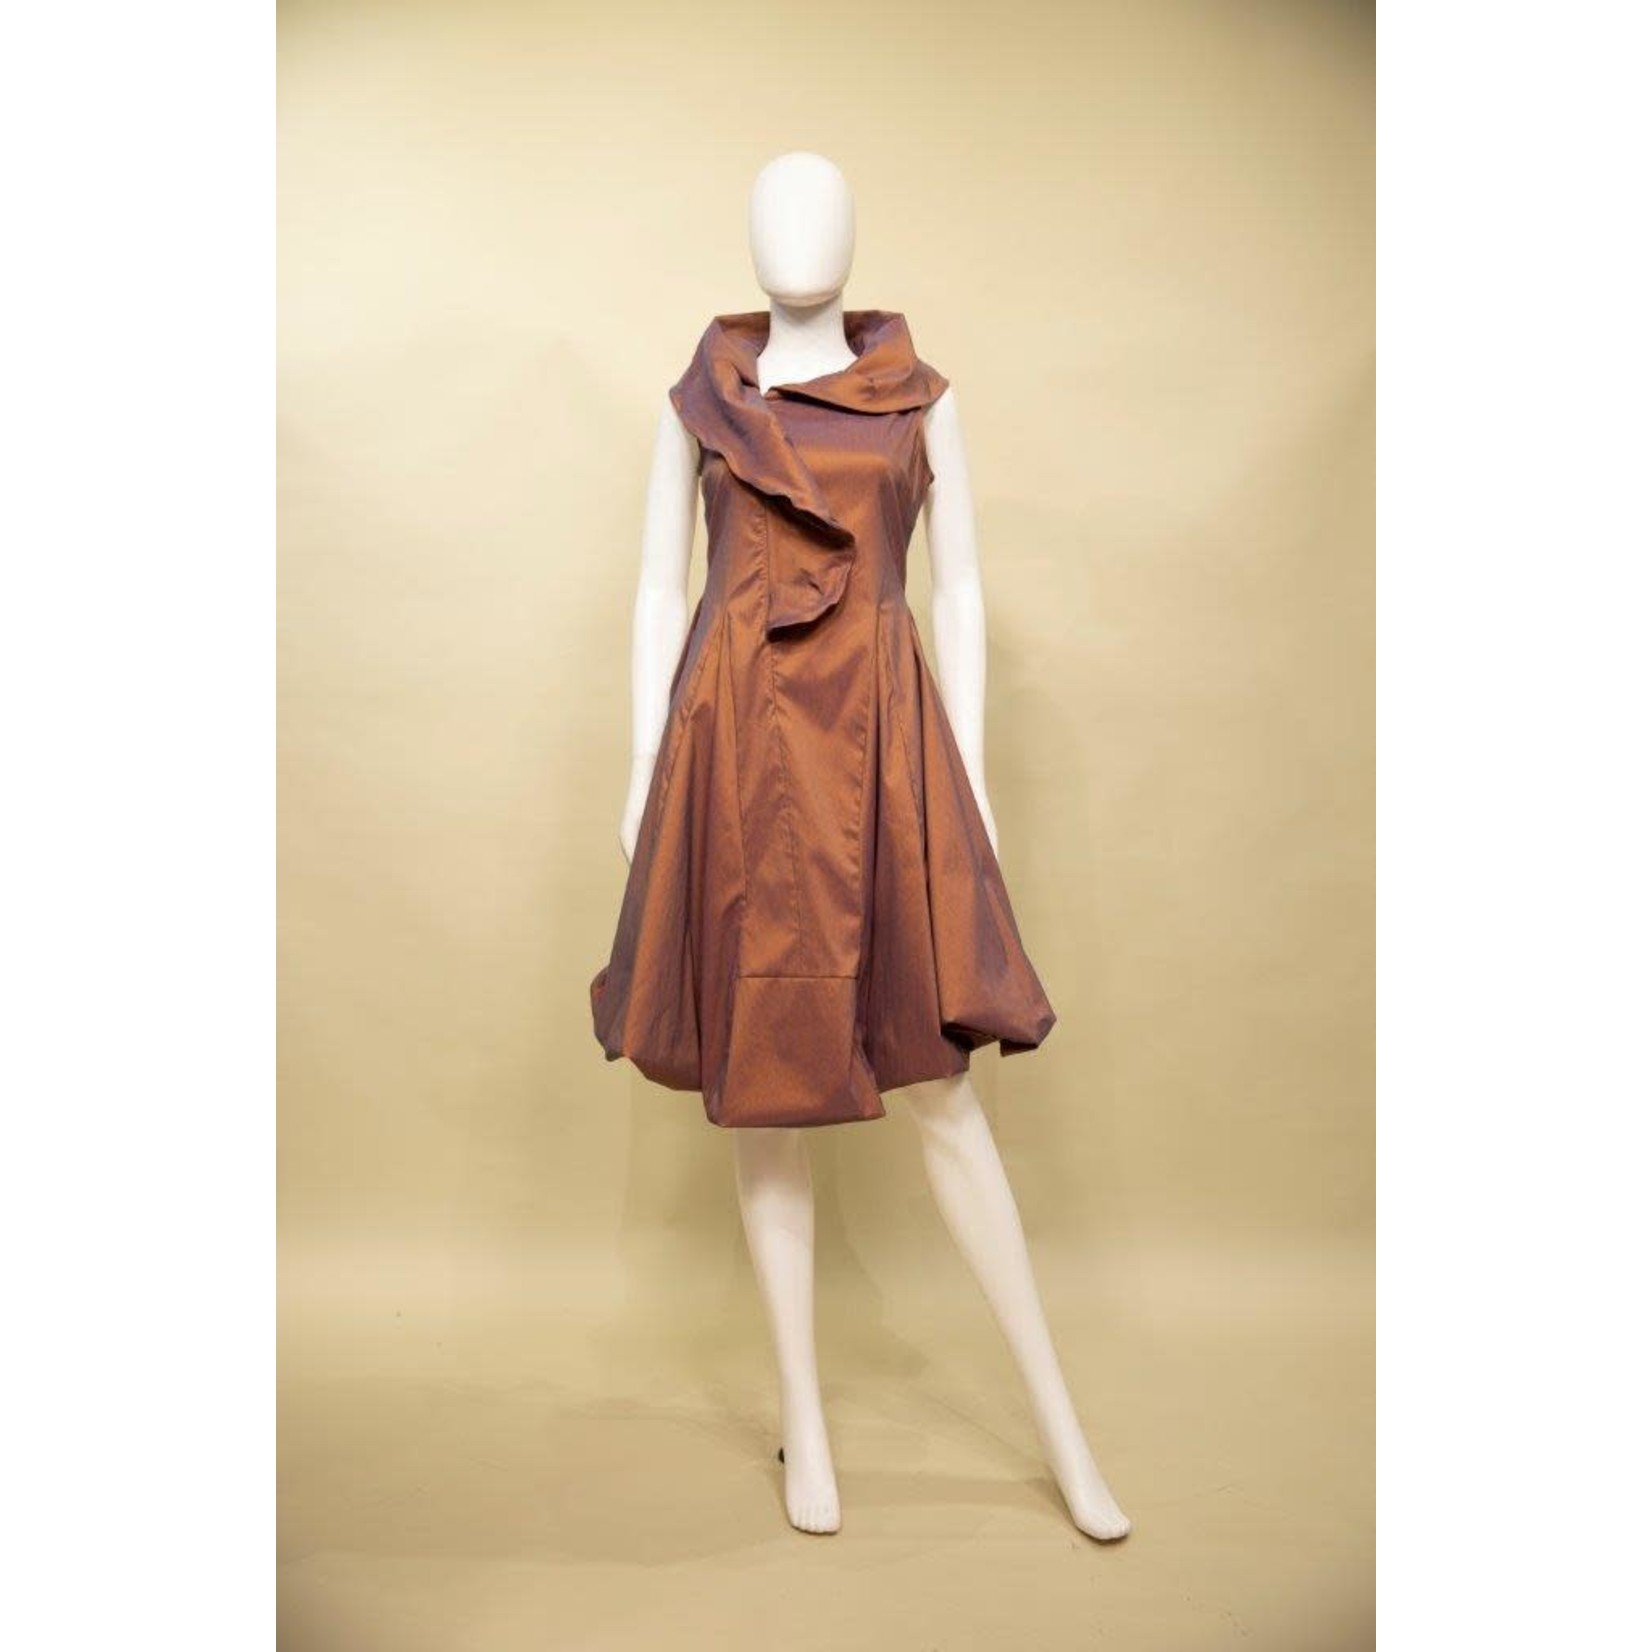 Samuel Dong Wired SD LOGO Neck Sleeveless Bubble Dress in Cinnamon